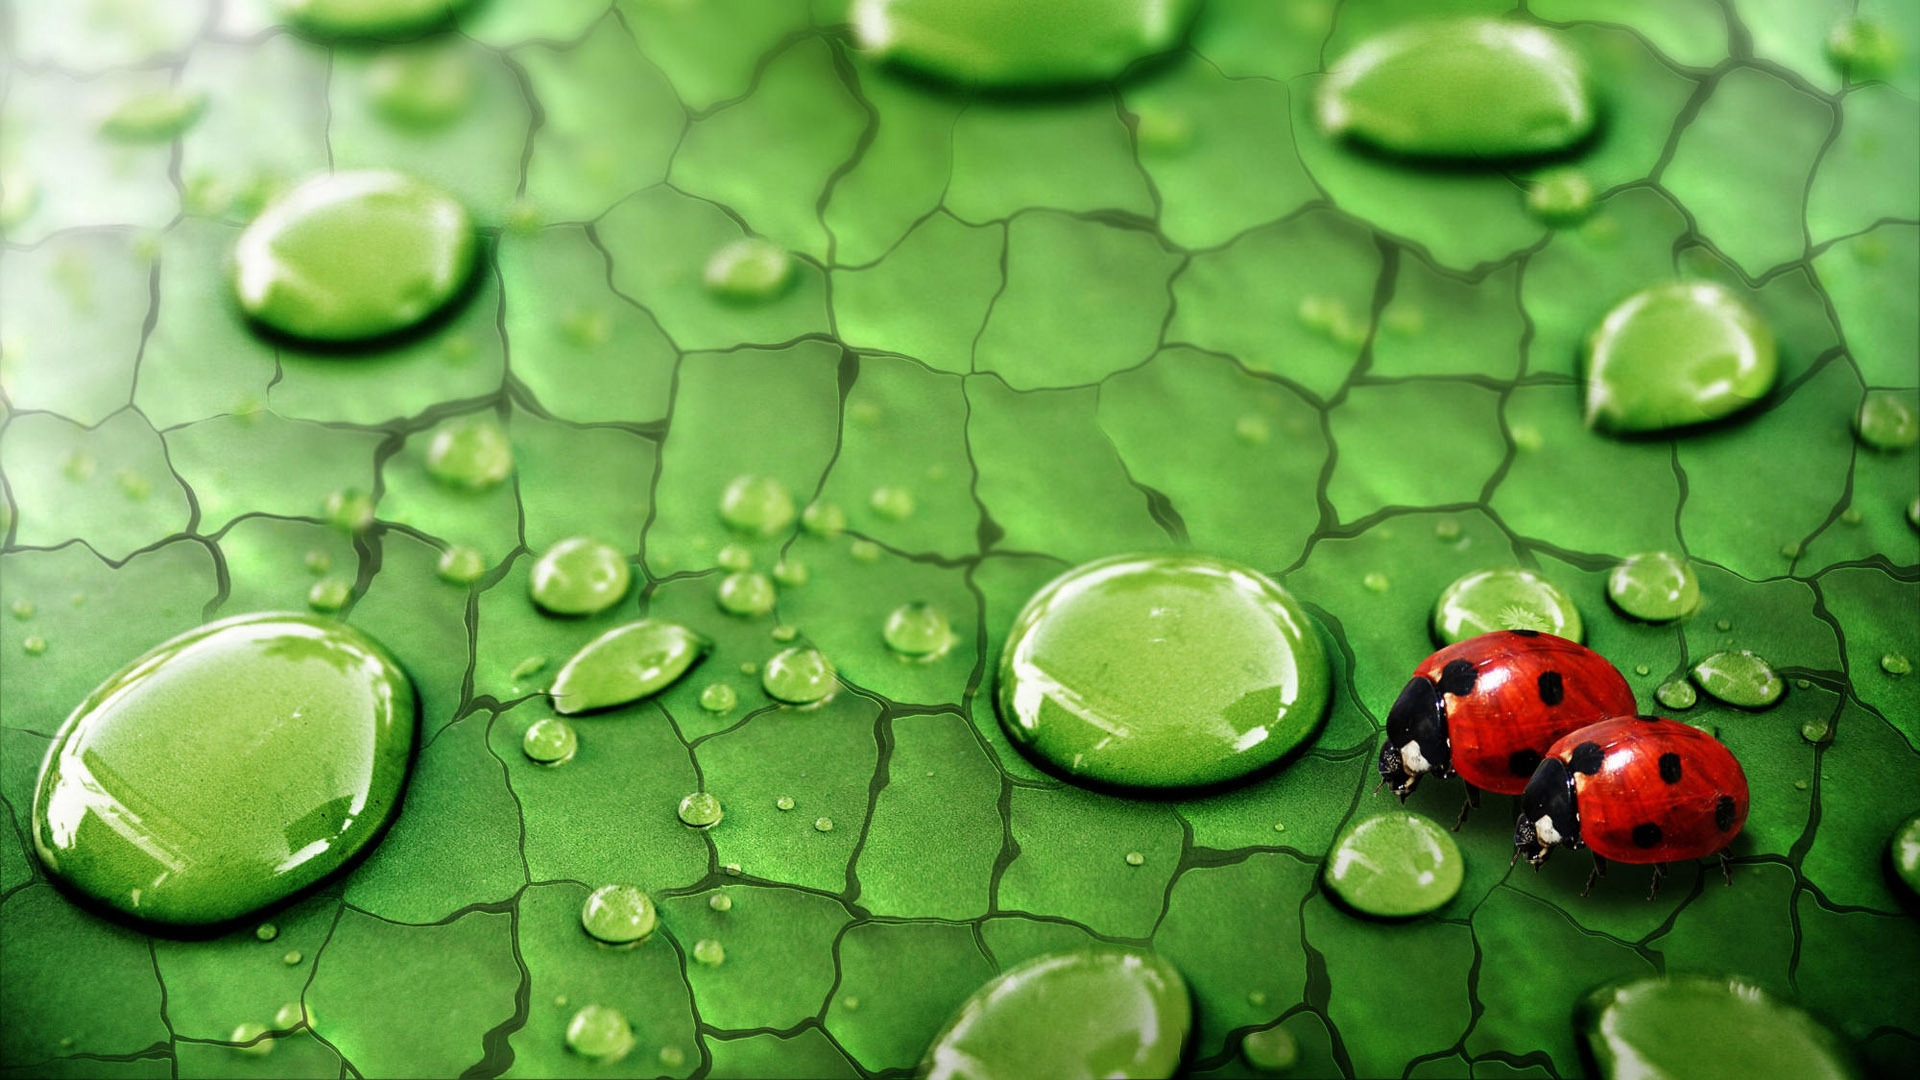 Ladybug In Love for 1920 x 1080 HDTV 1080p resolution